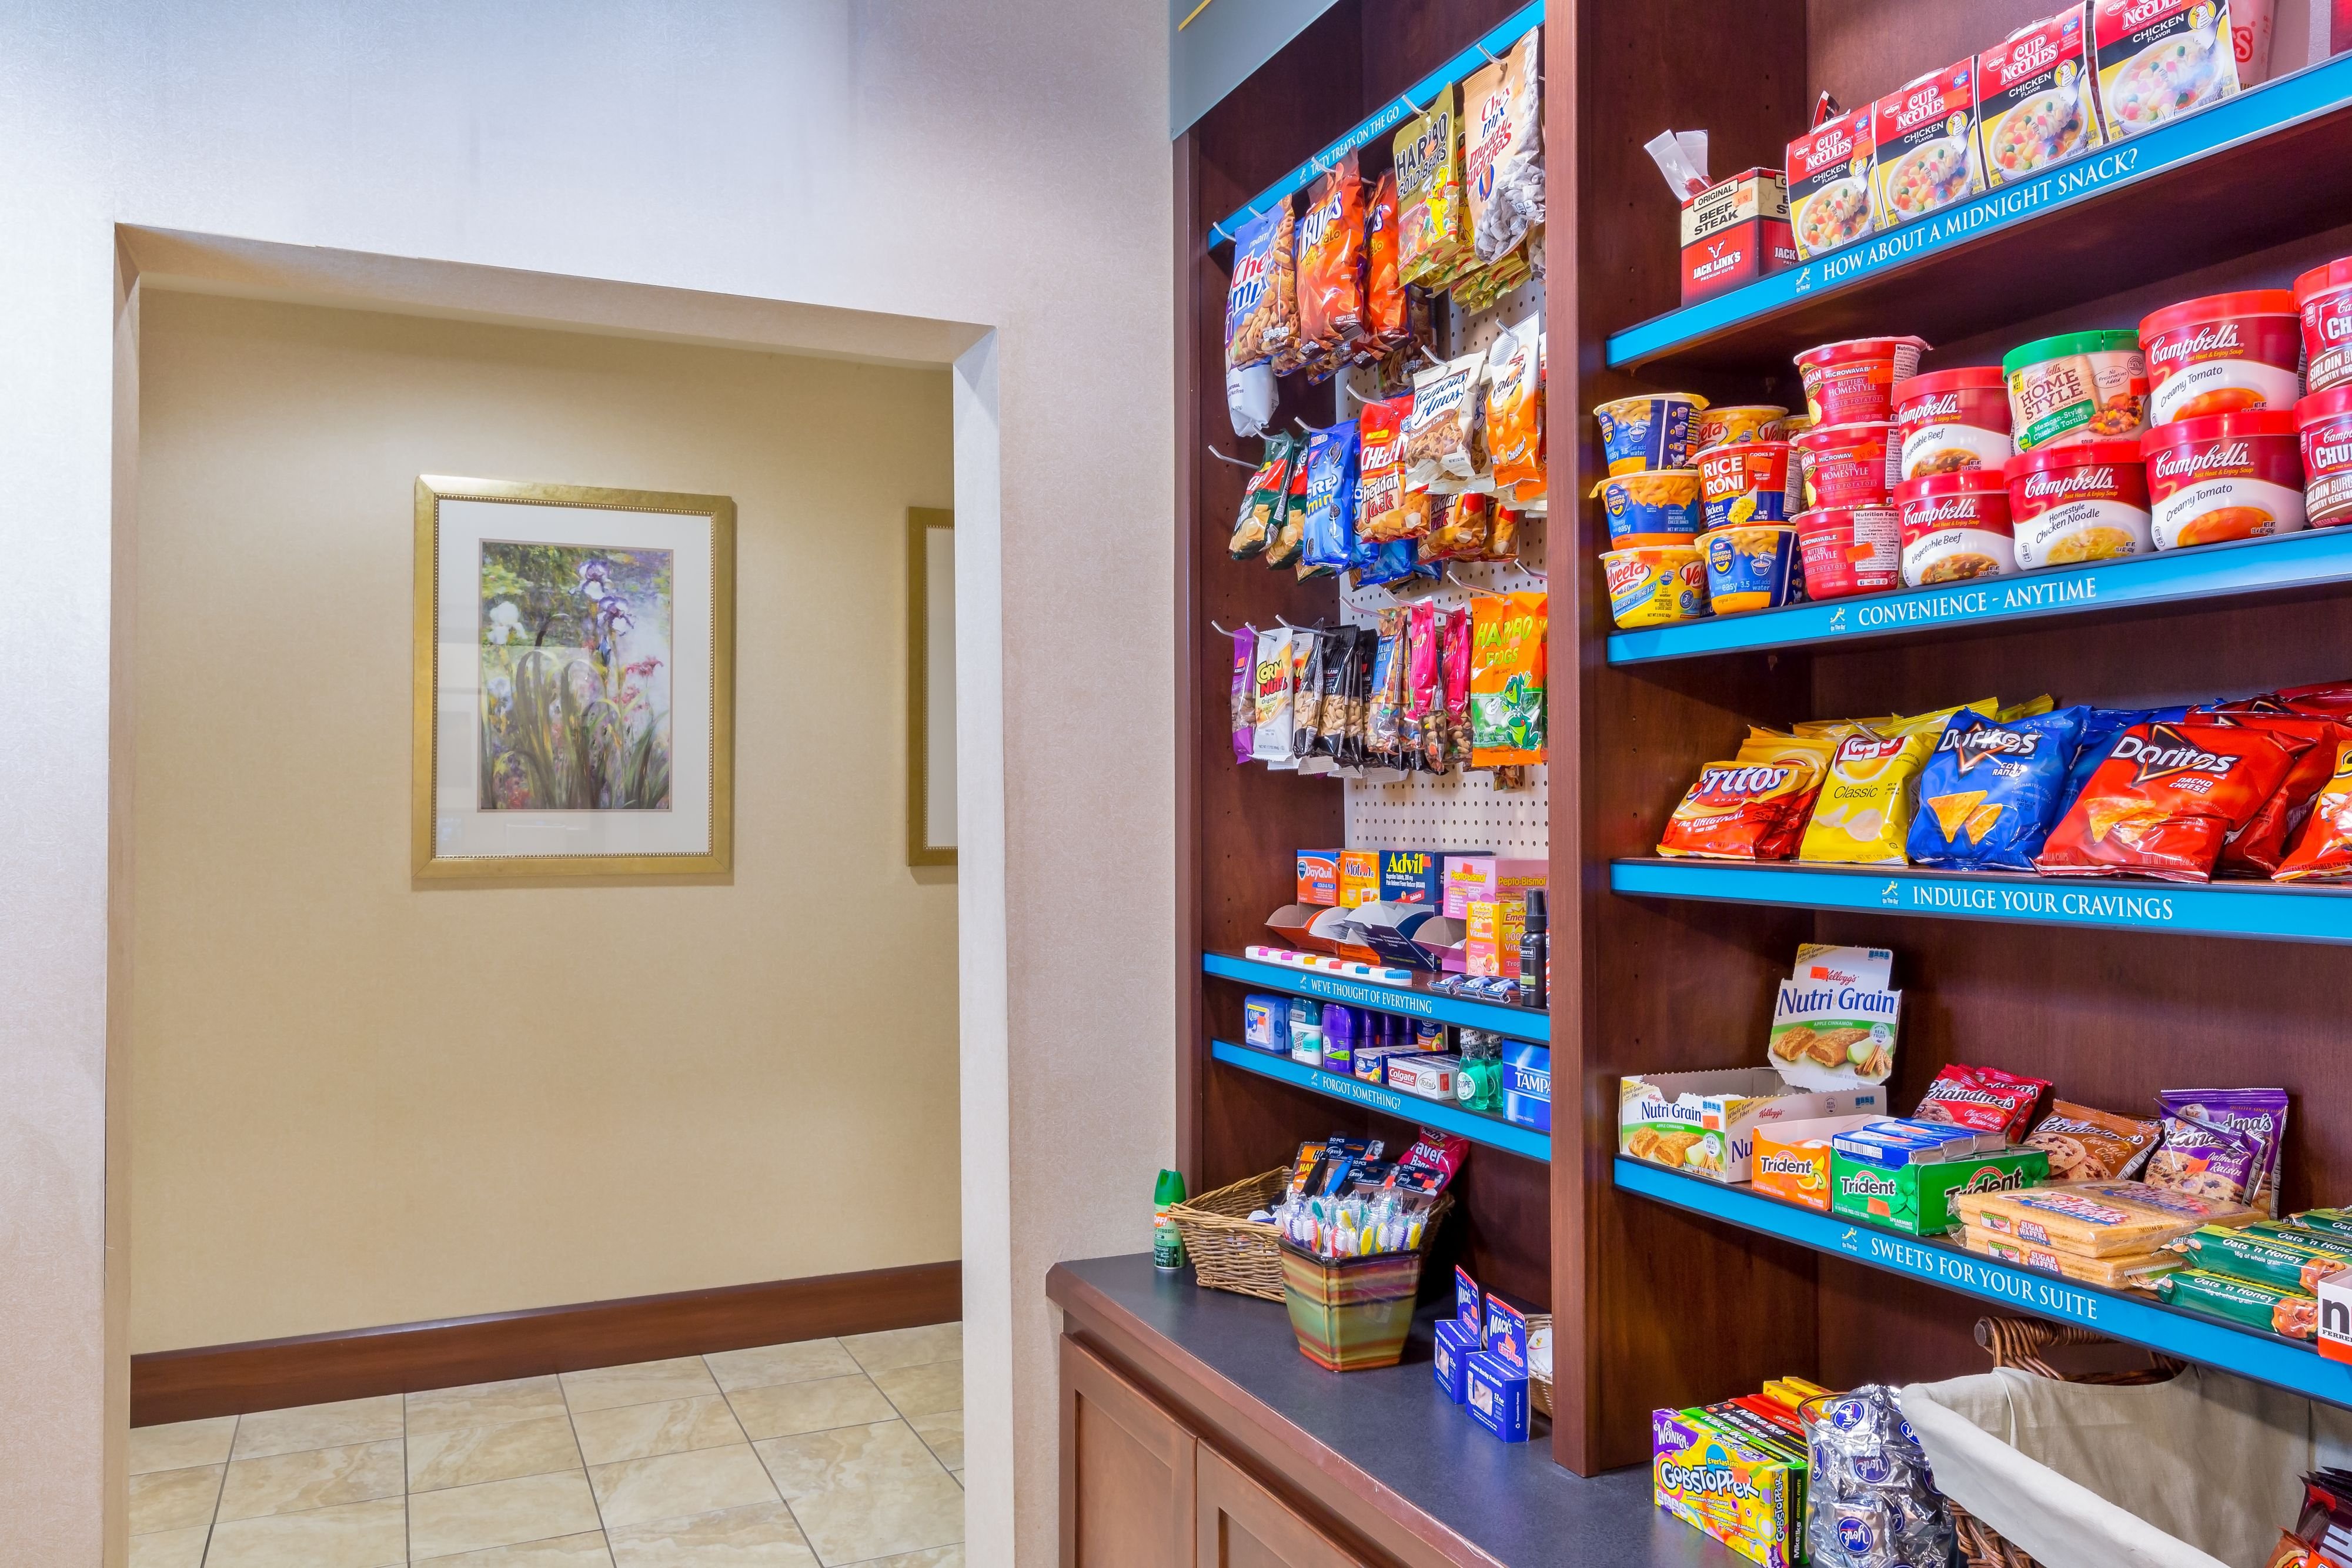 Grab a snack from The Pantry